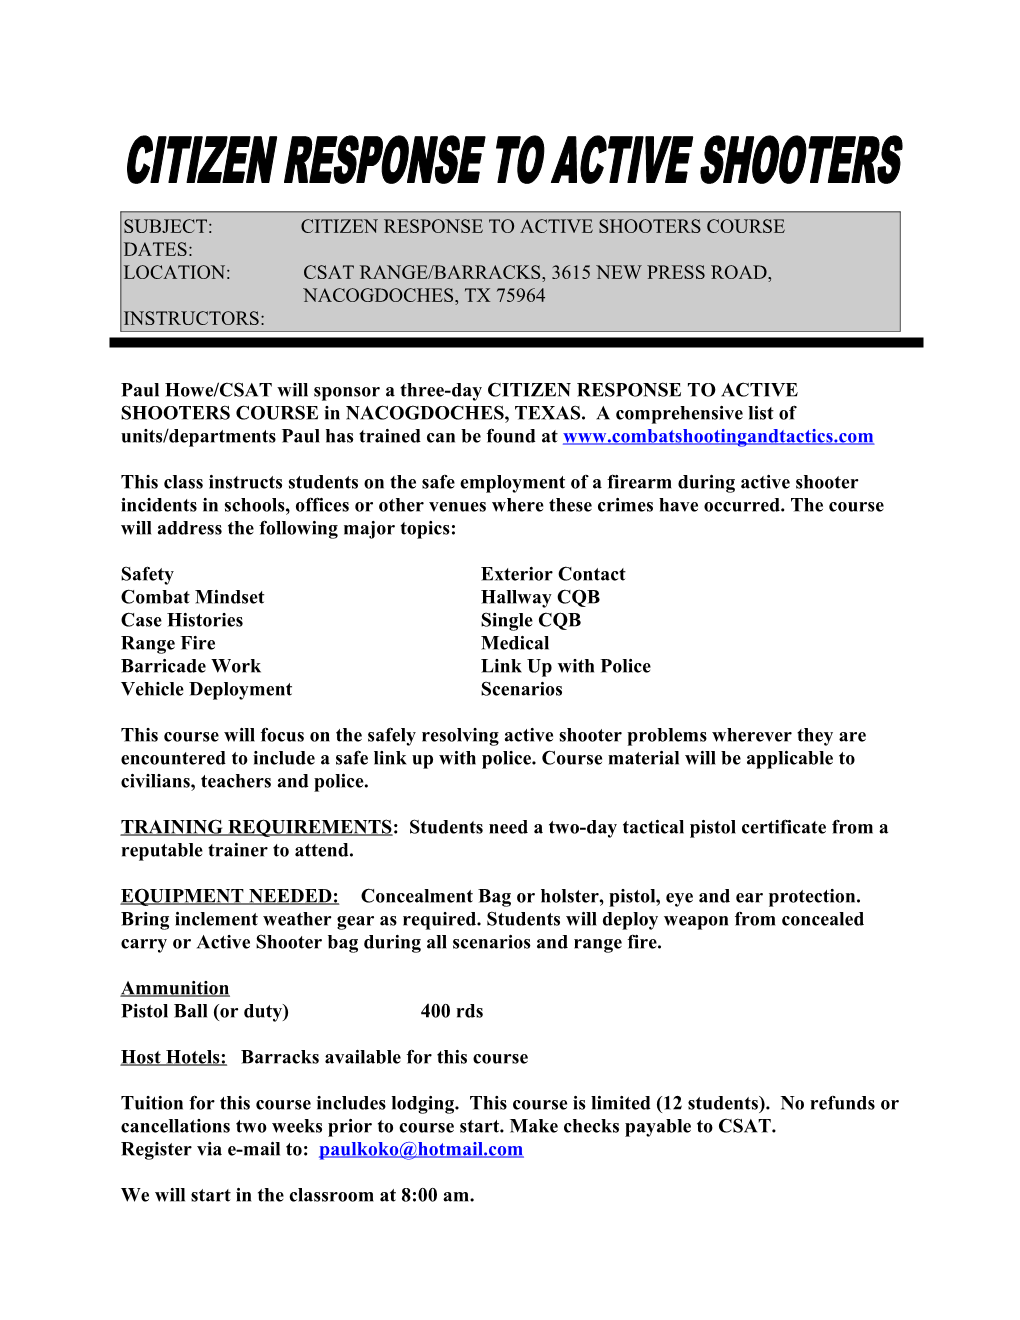 Subject: Citizen Response to Active Shooters Course